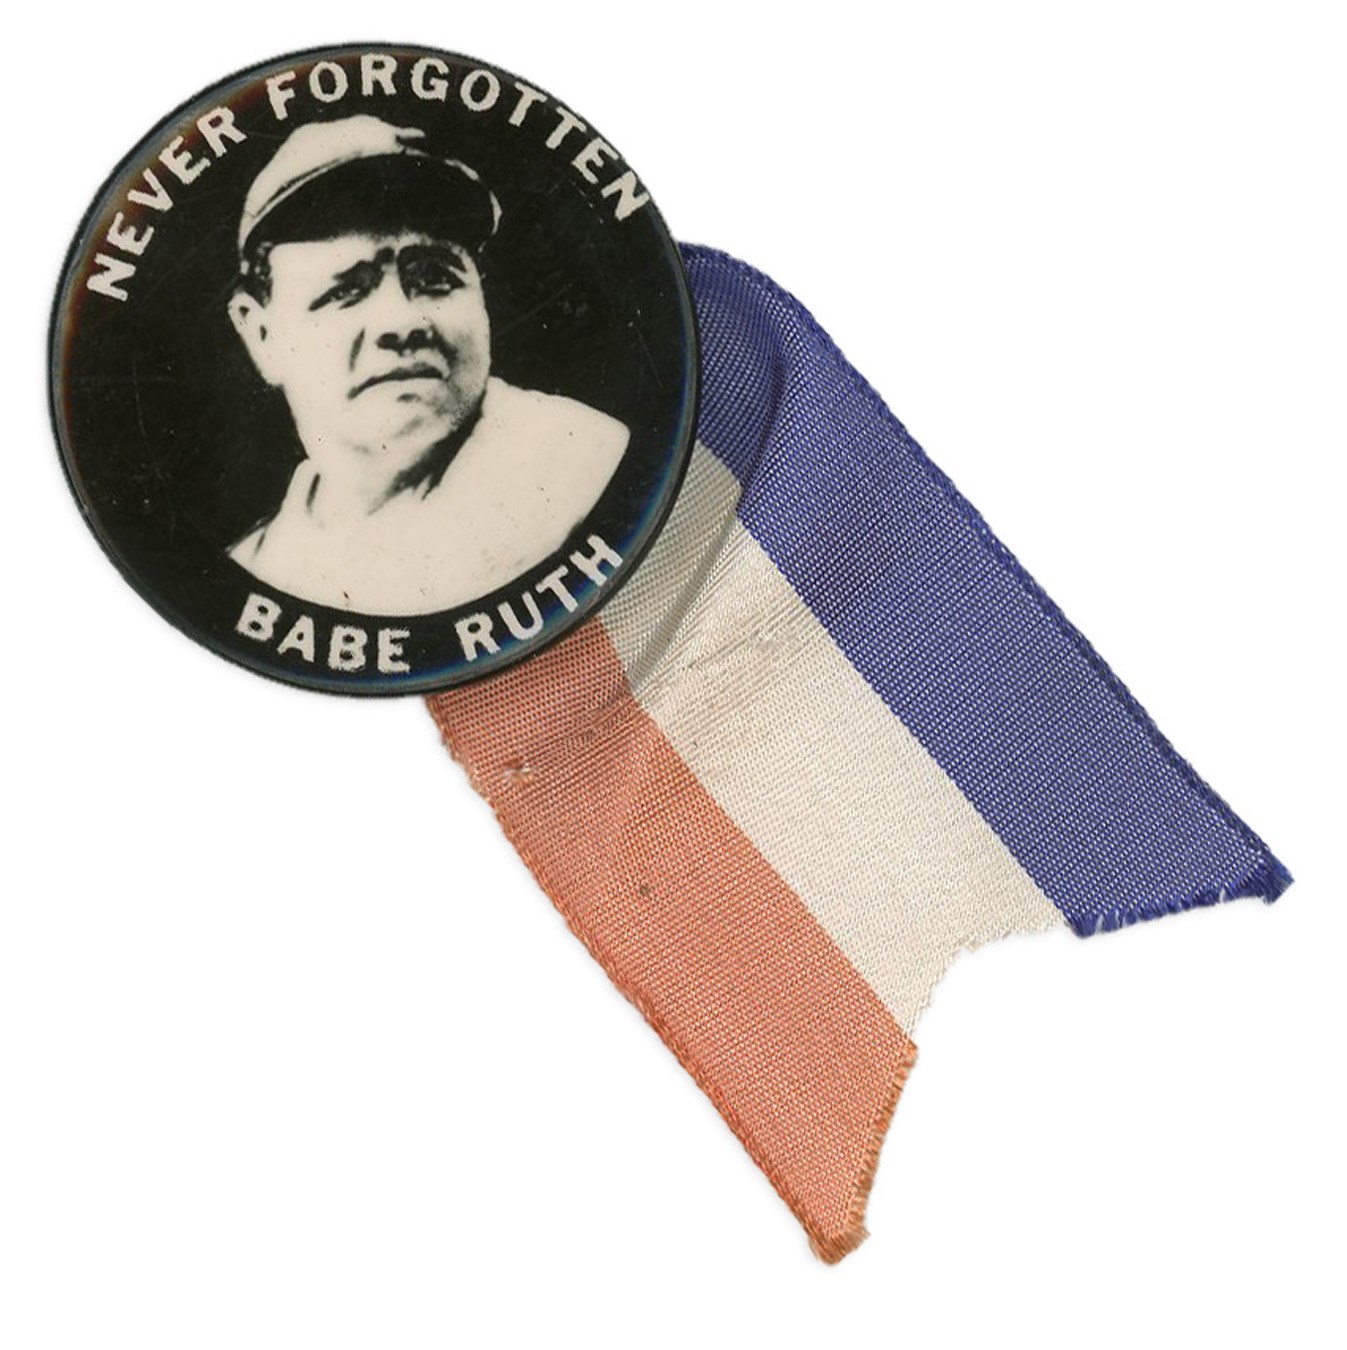 Ruth and Gehrig - 1948 Babe Ruth "Never Forgotten" PM10 Pin